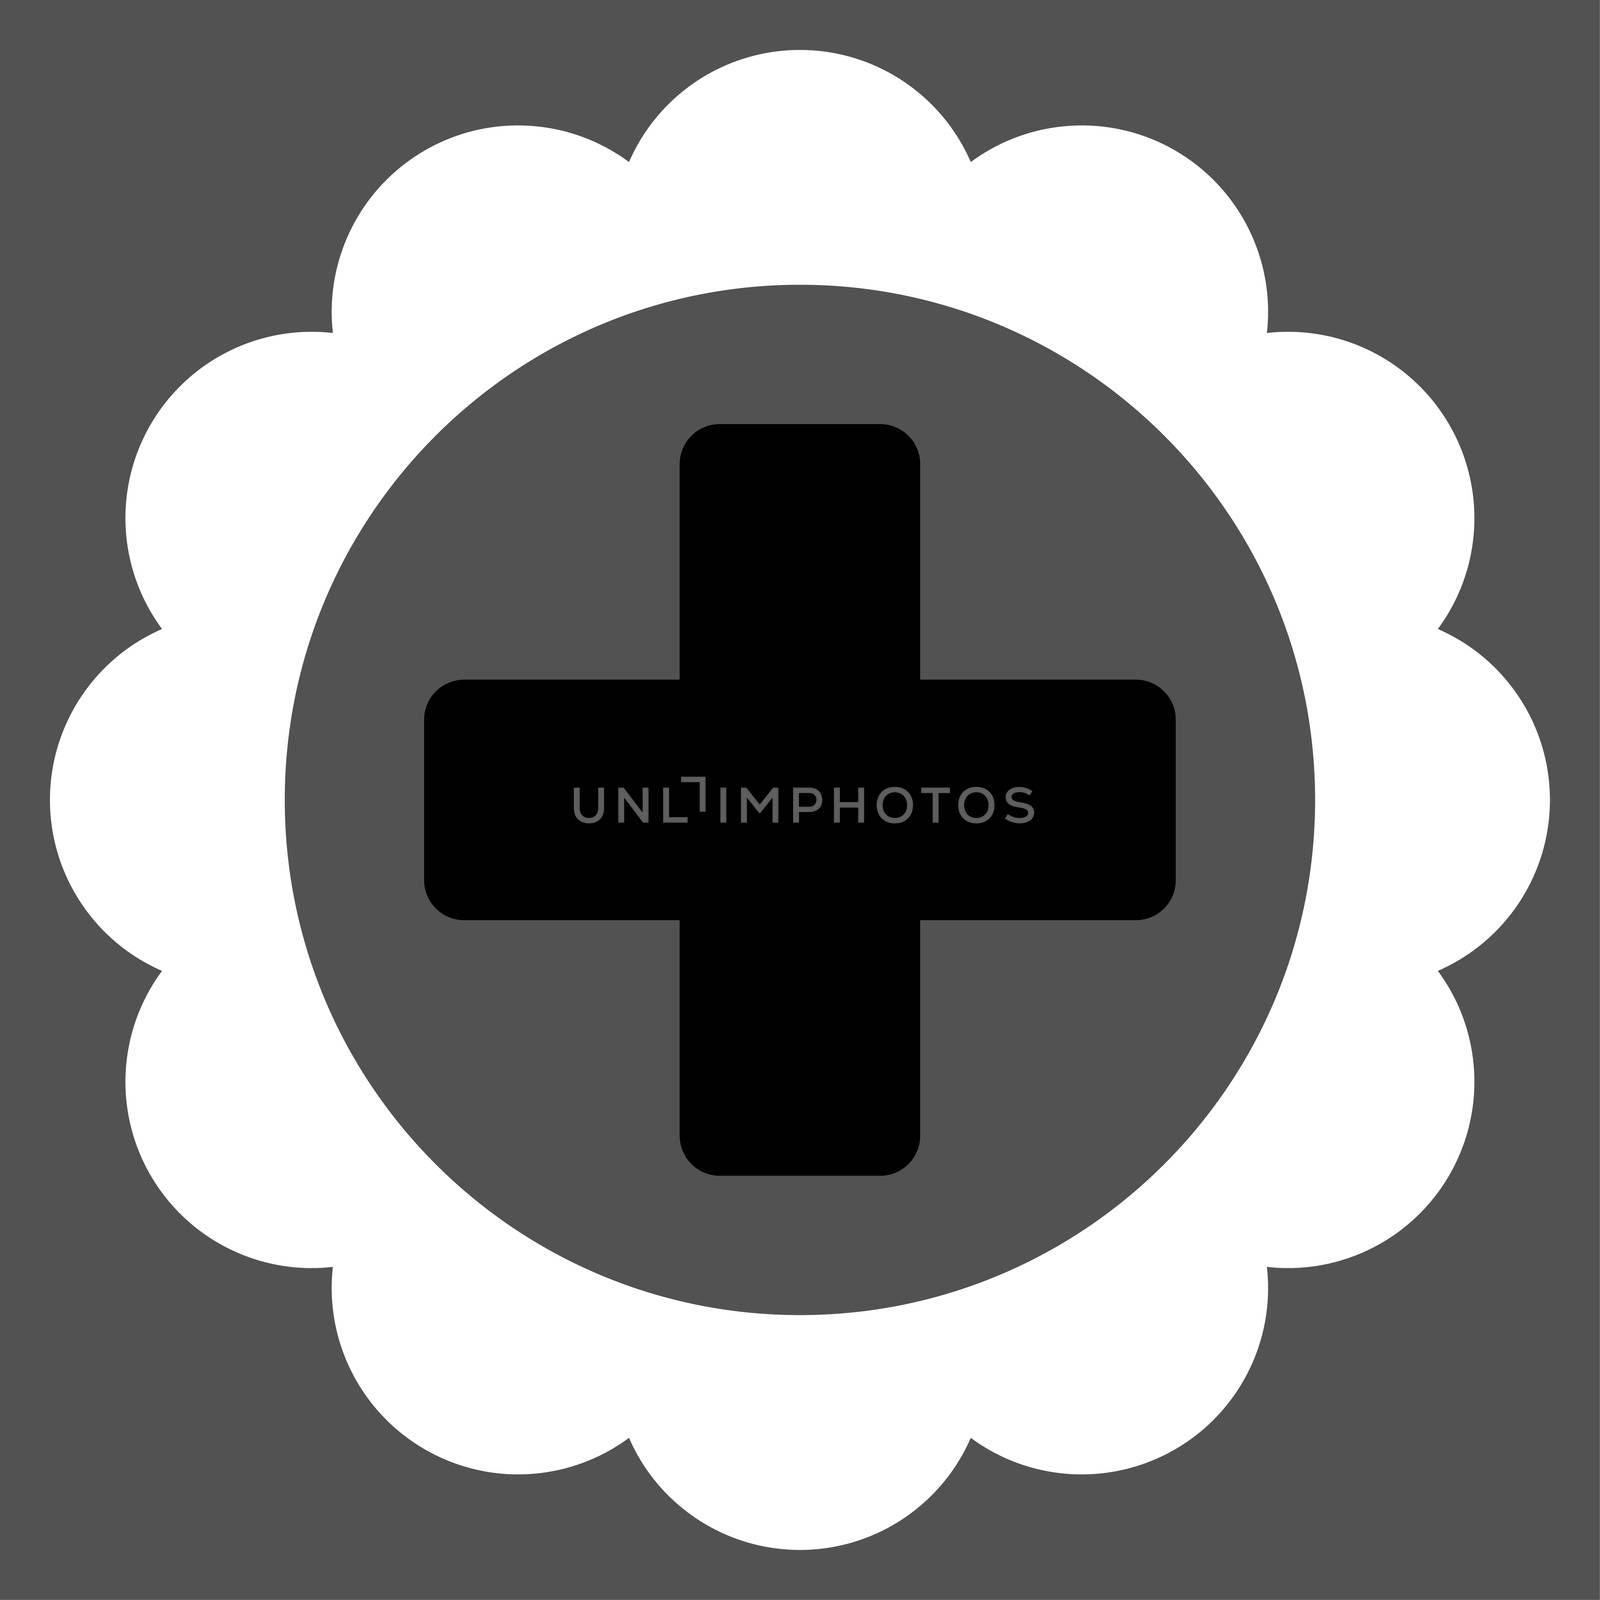 Medical Sticker raster icon. Style is bicolor flat symbol, black and white colors, rounded angles, gray background.